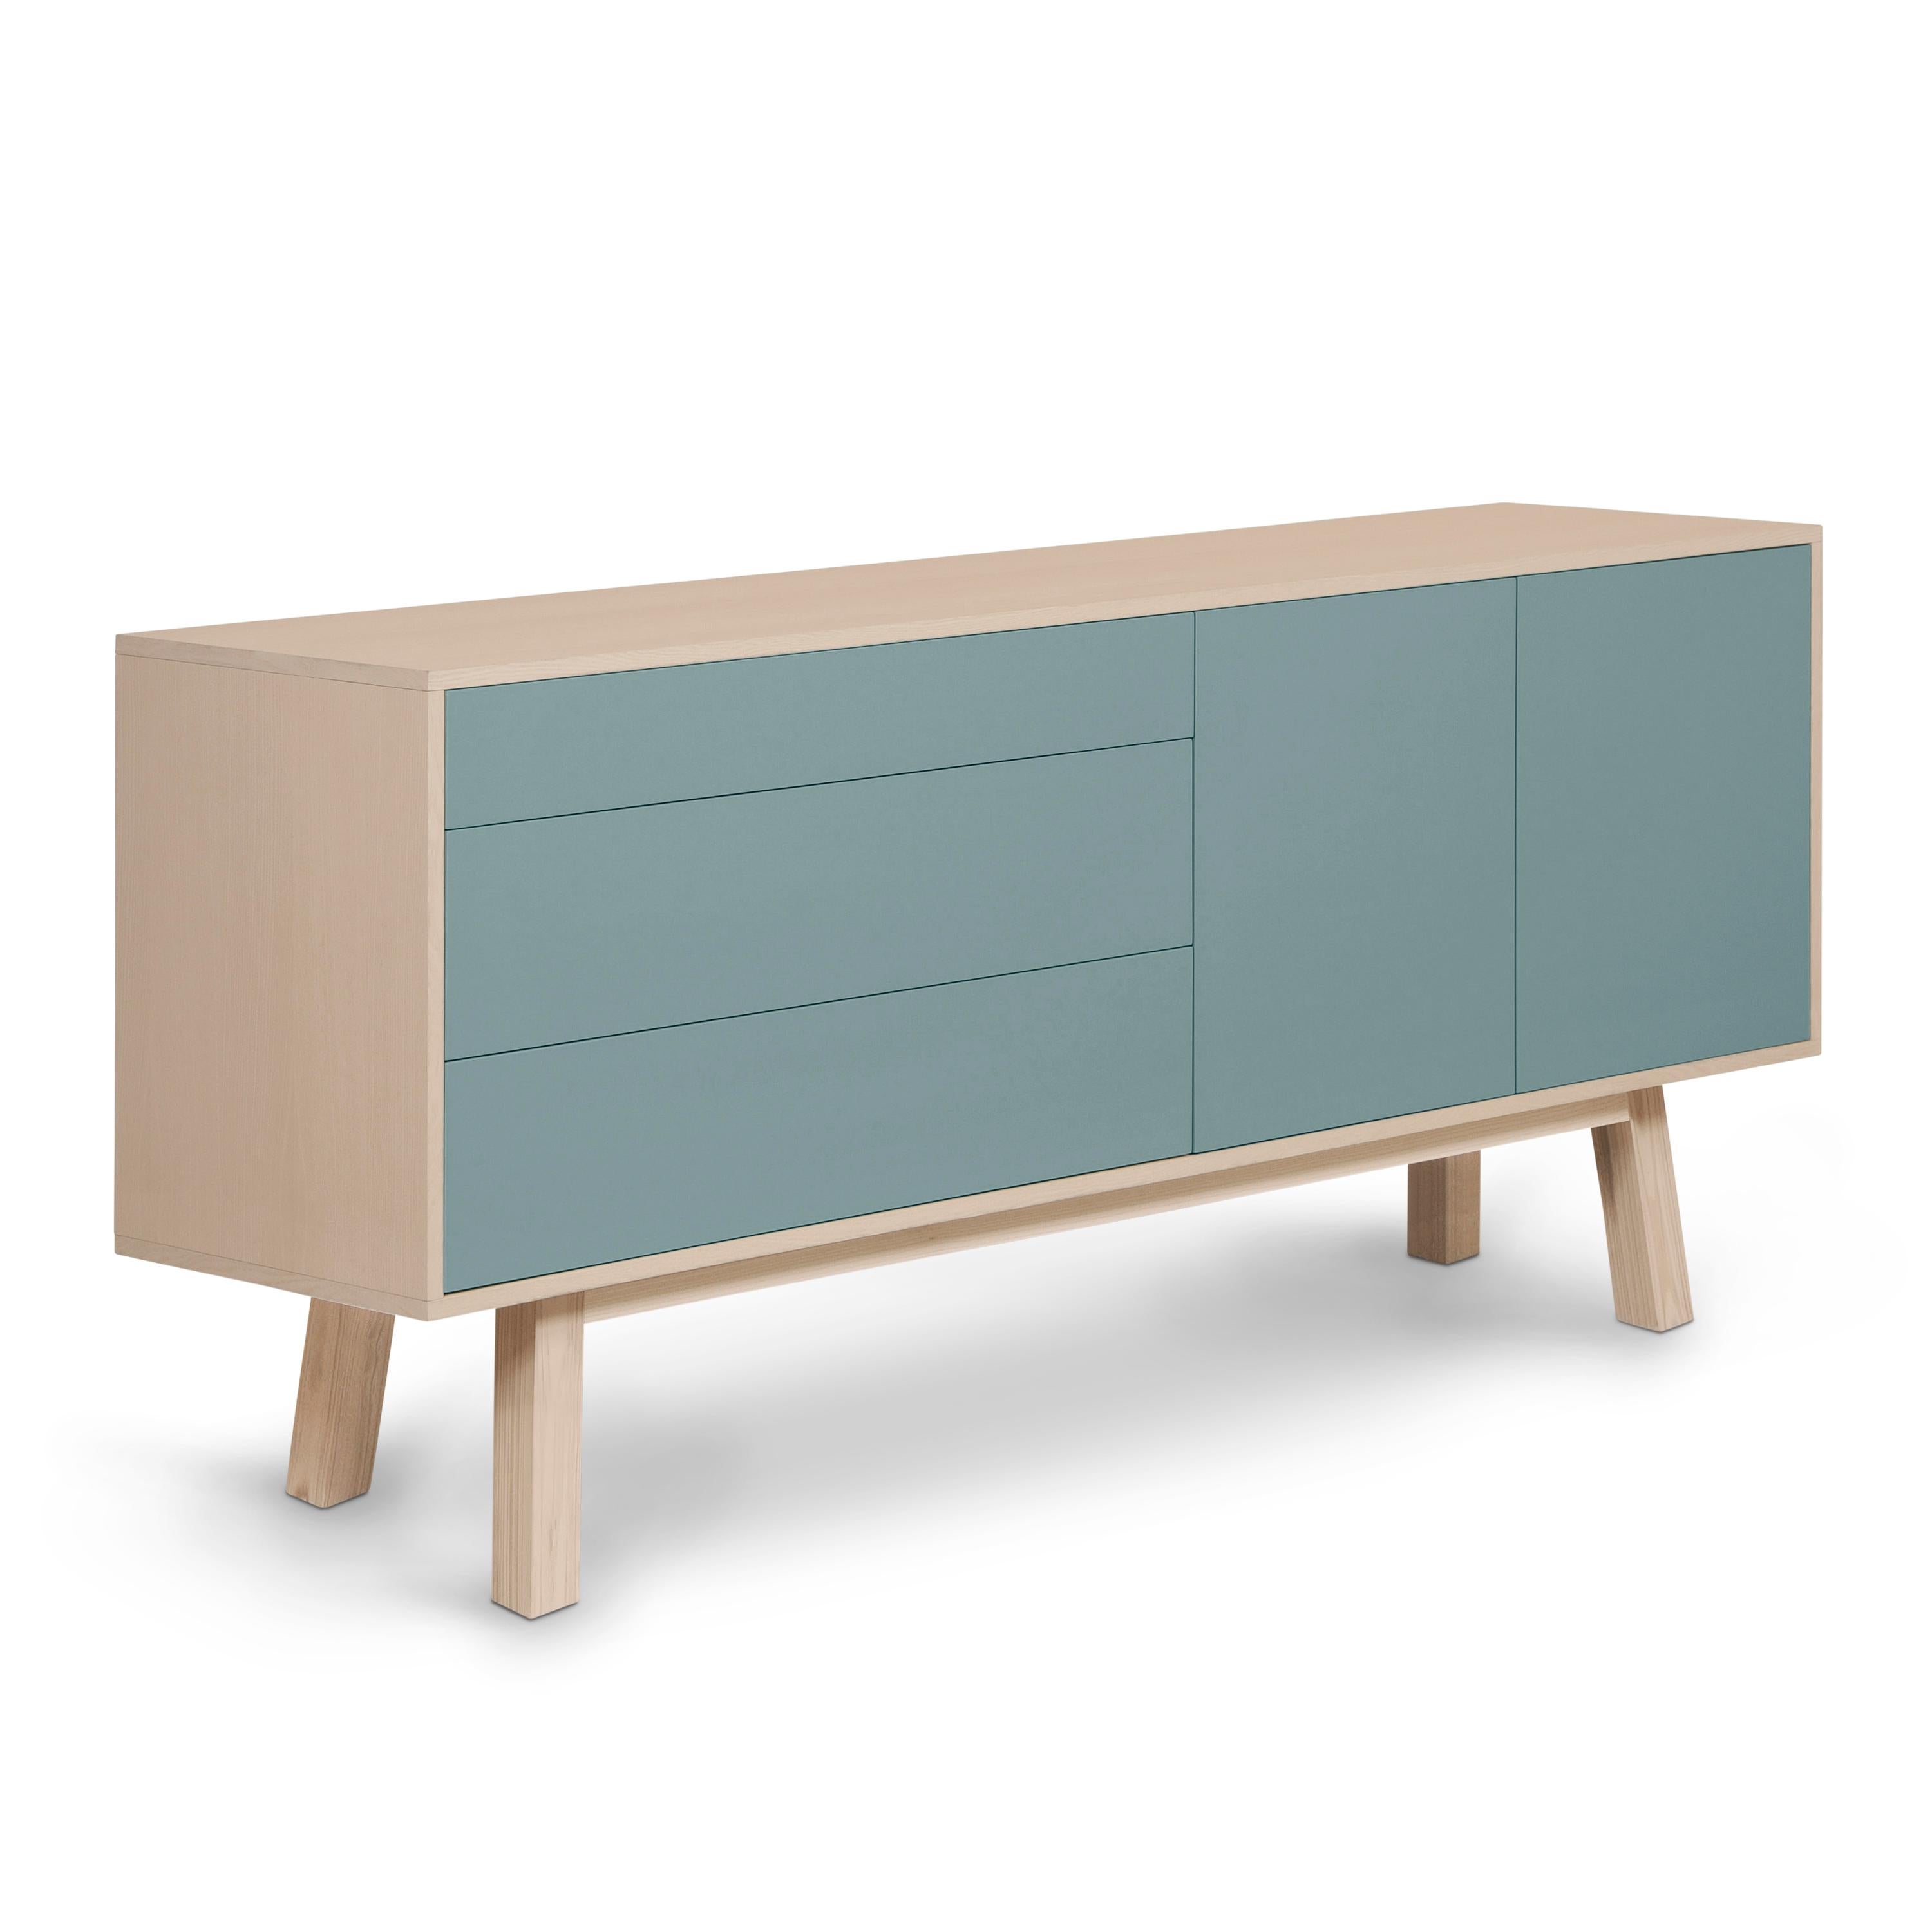 2-Door 3 Drawer High Sideboard in Ash, Design Eric Gizard, Paris Made in France For Sale 3